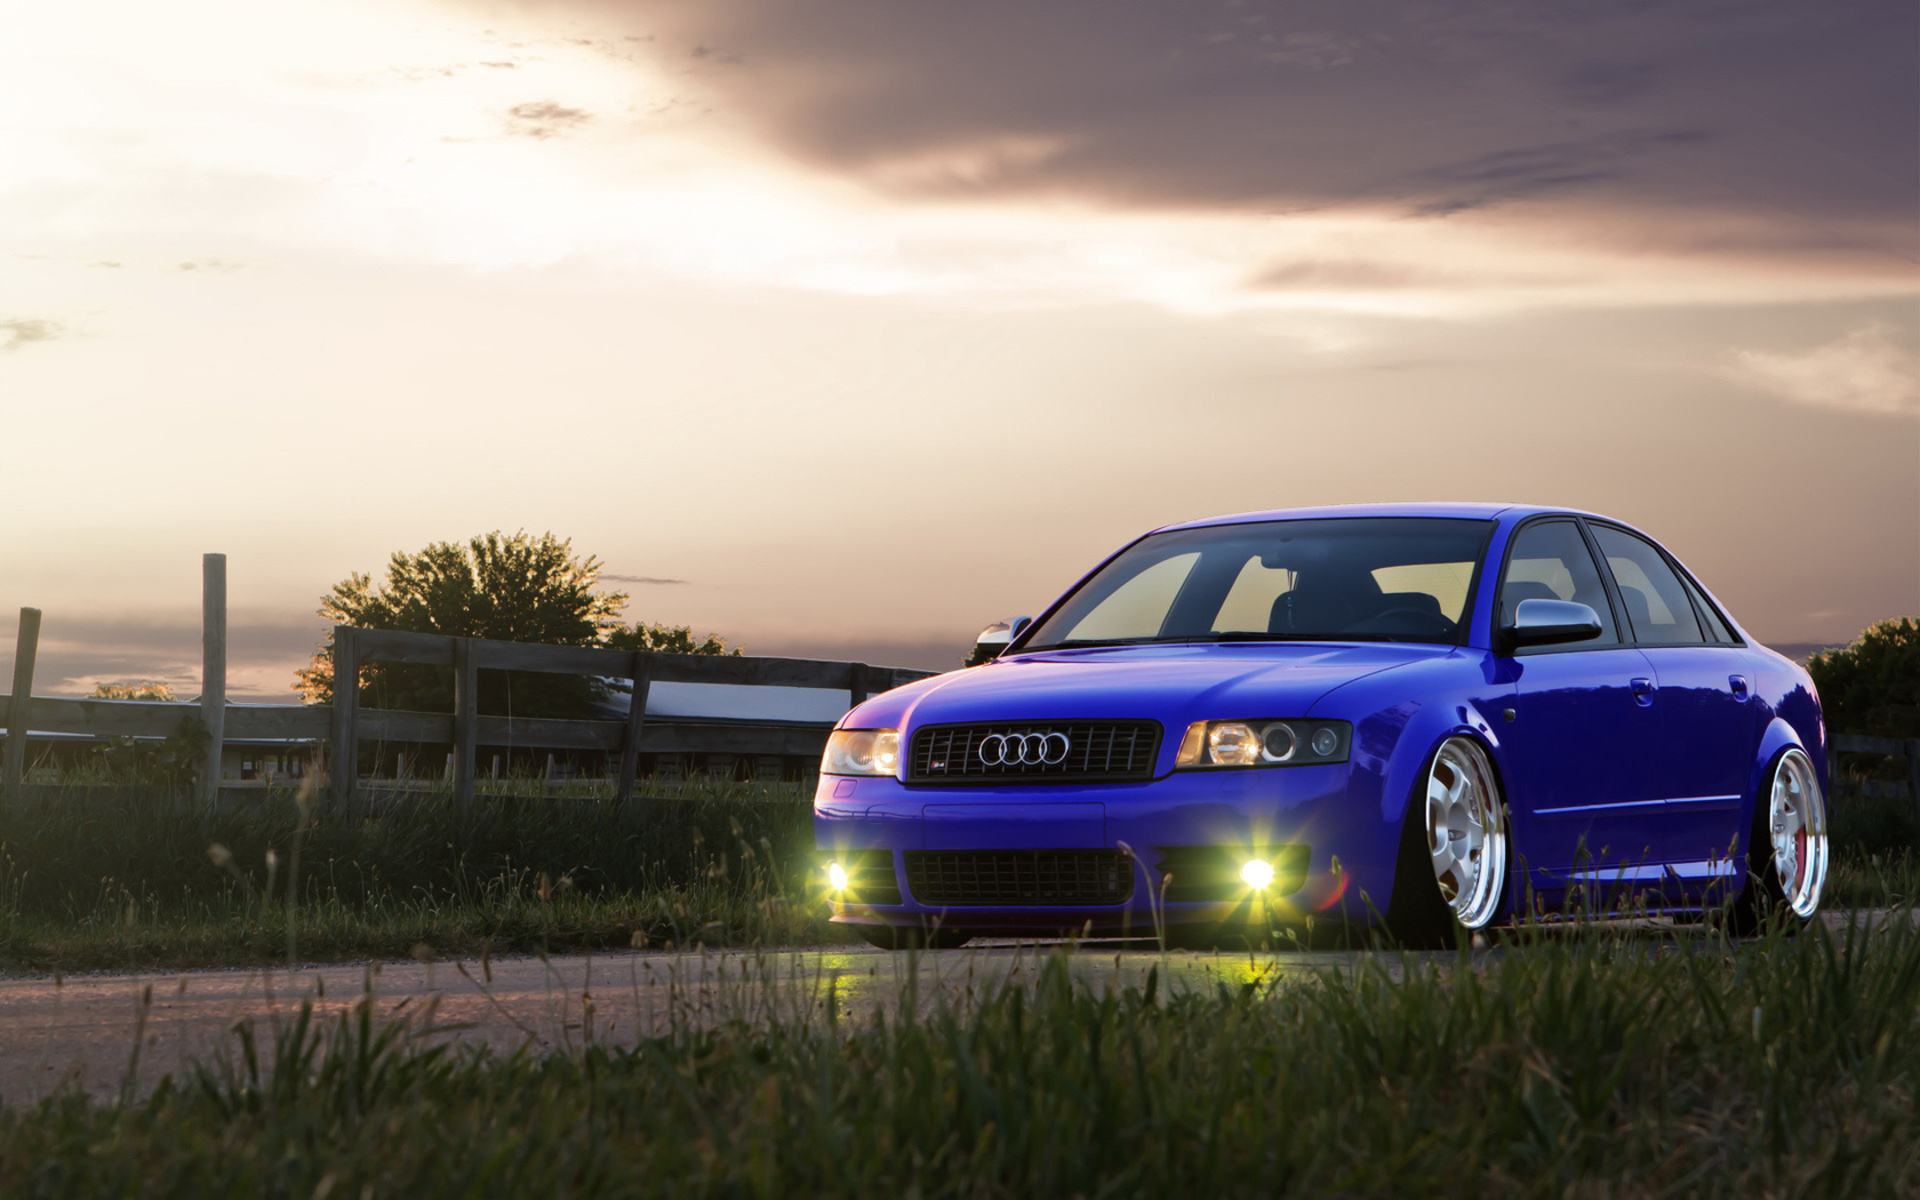 audi, Vehicles, Cars, Stance, Tuning, Low, Wheels, Lights, Roads, Sky, Clouds, Grass Wallpaper